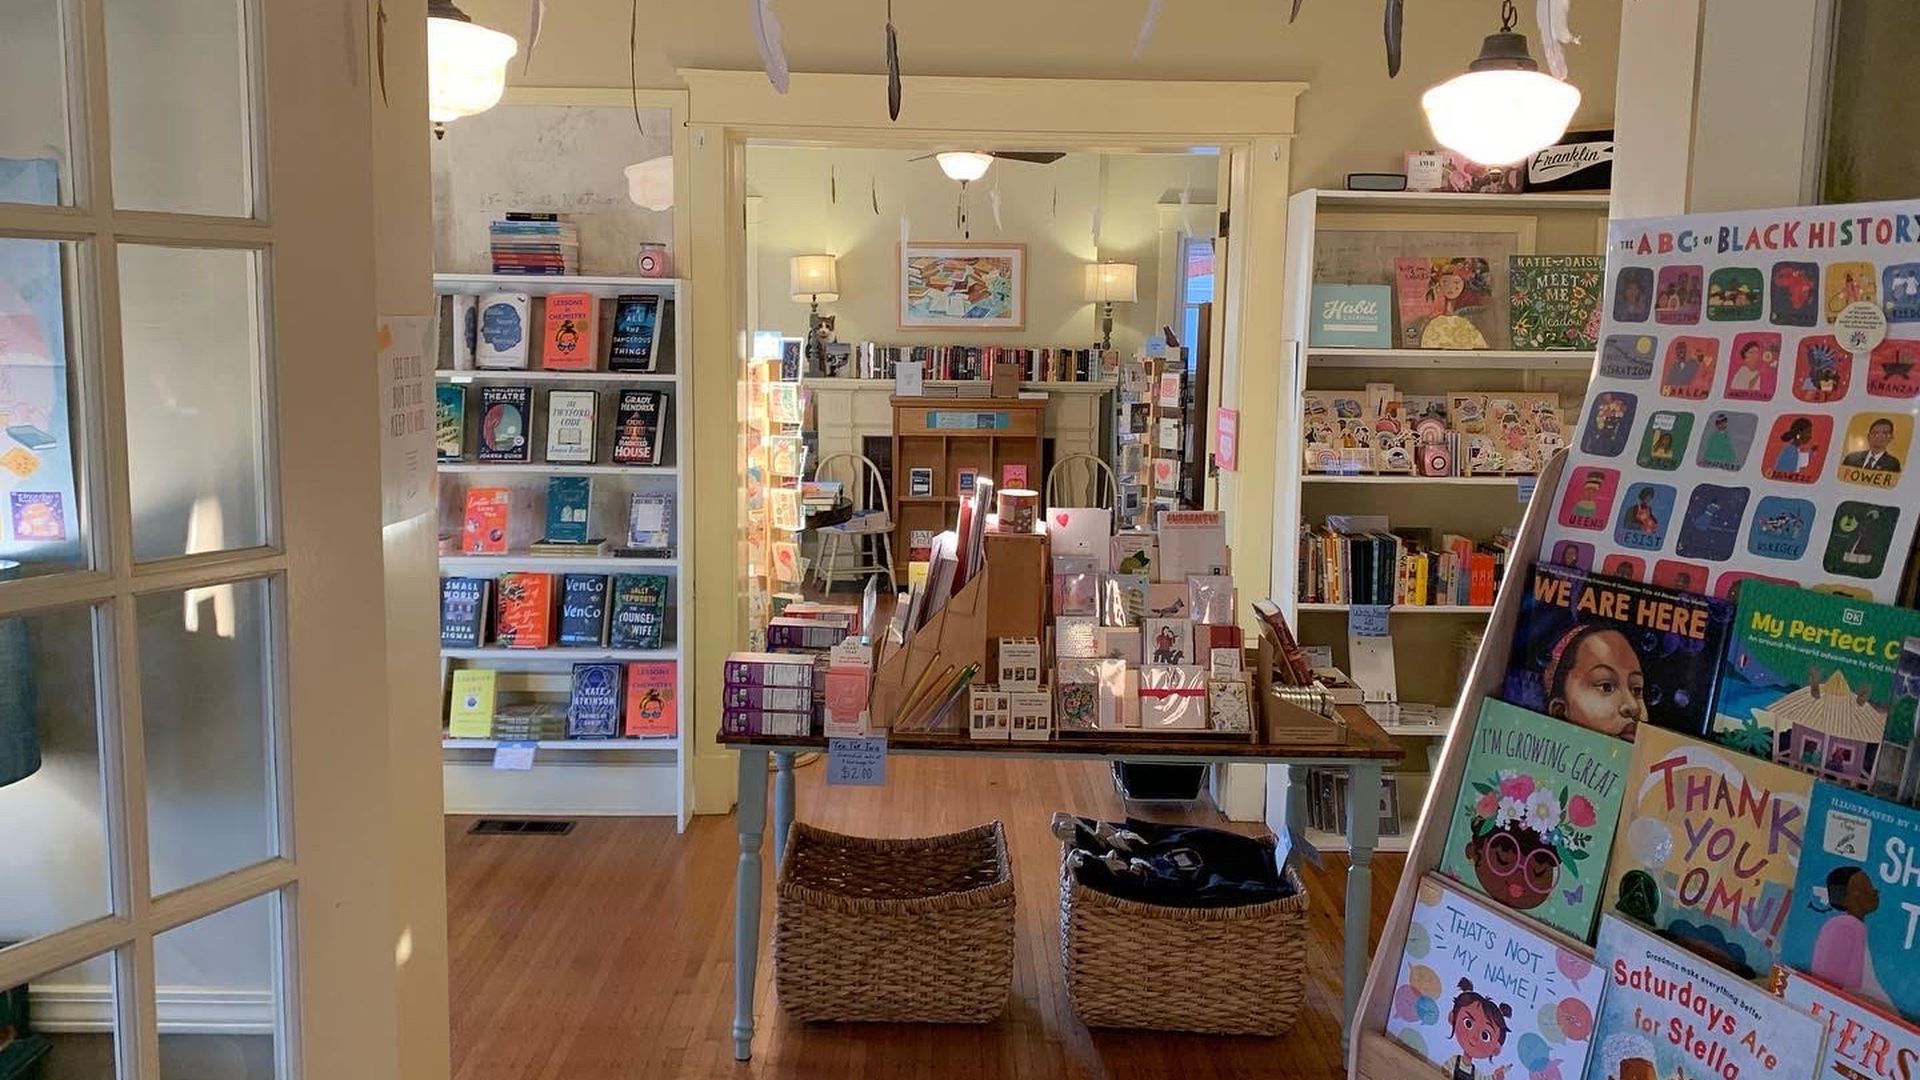 A photo of the interior of Wild Geese Bookshop, showing shelves and tables of books.